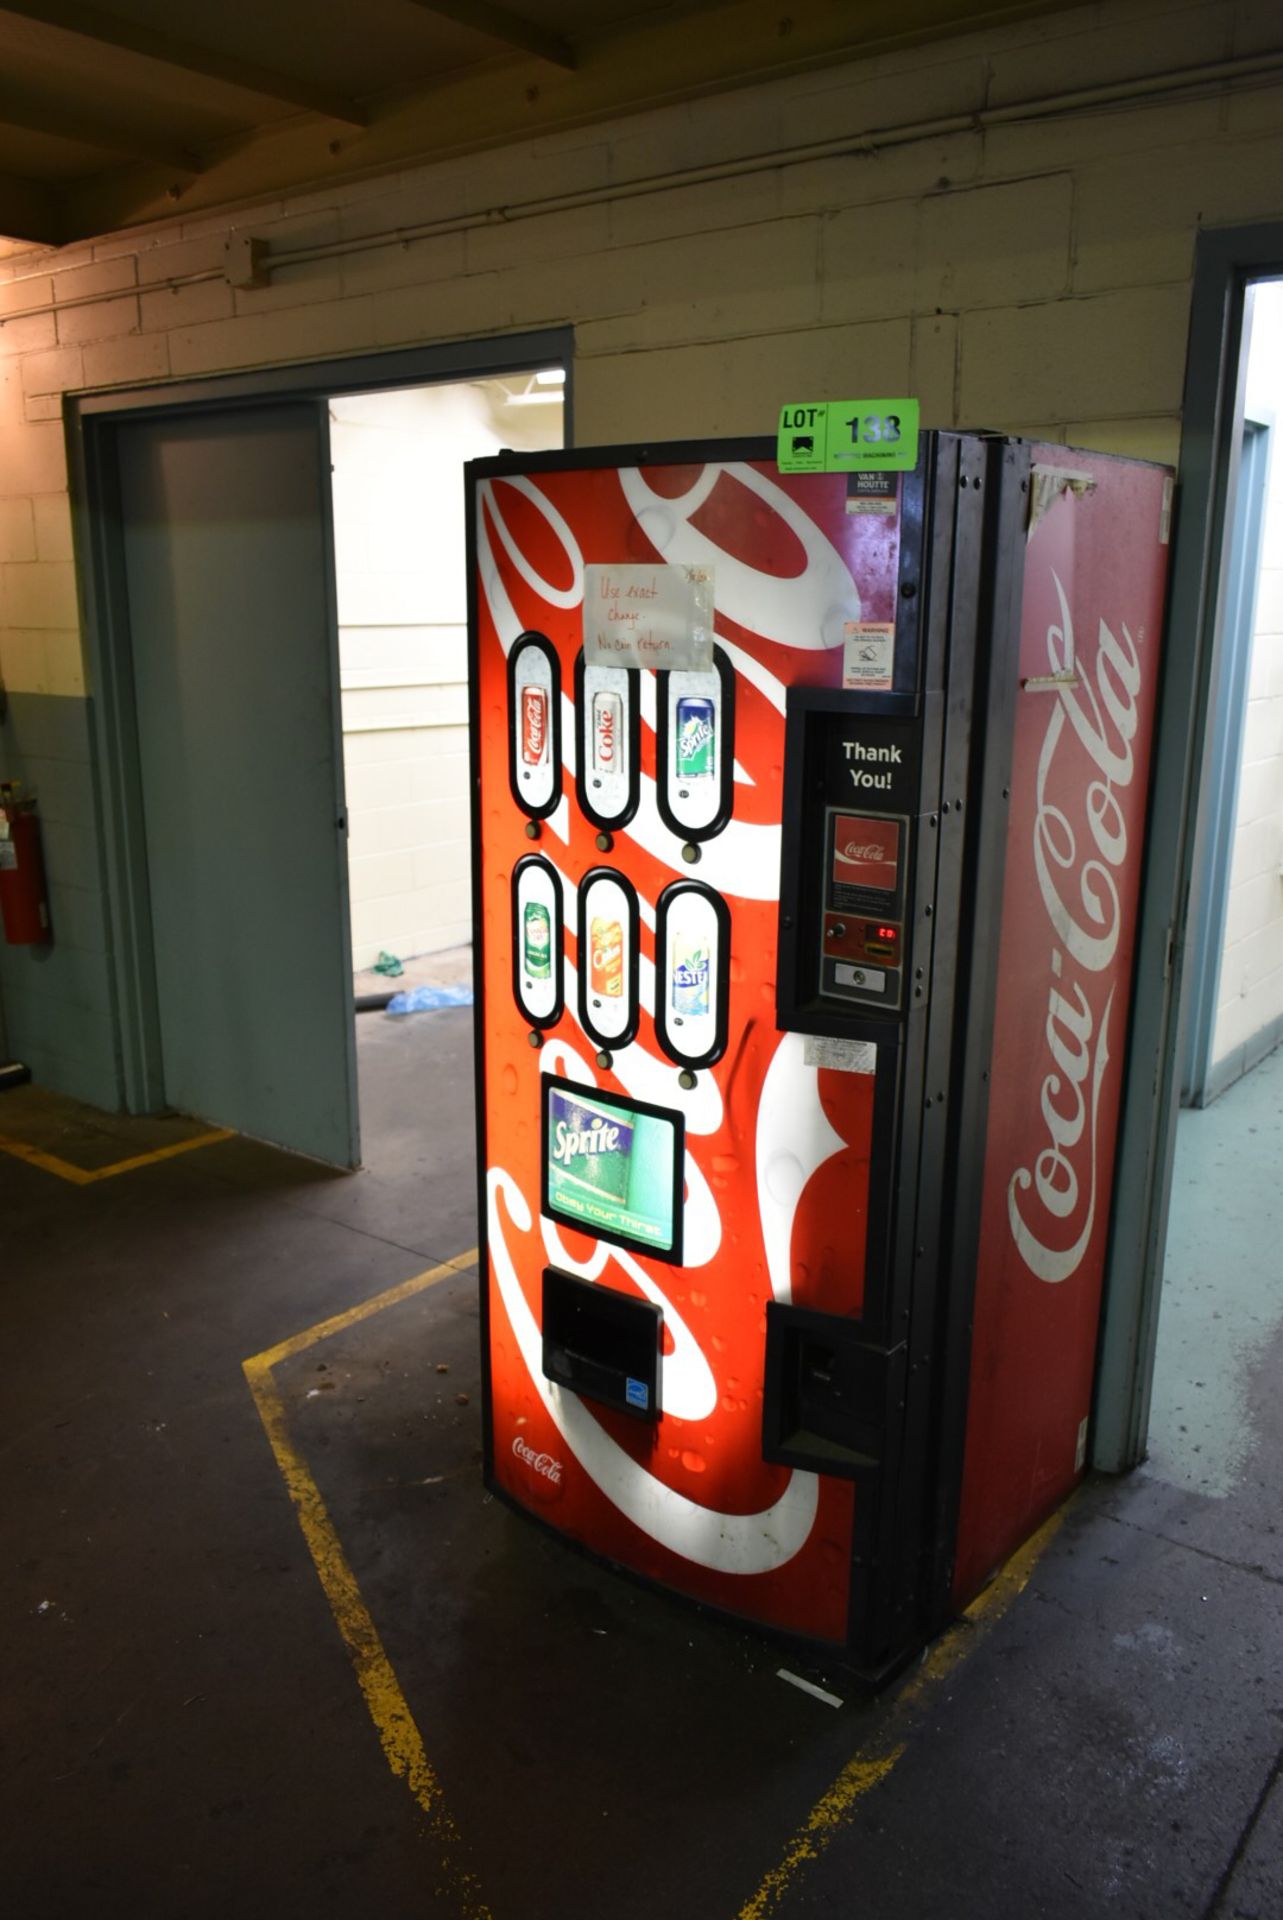 BEVERAGE VENDING MACHINE [RIGGING FEE FOR LOT#138 - $25 USD PLUS APPLICABLE TAXES]